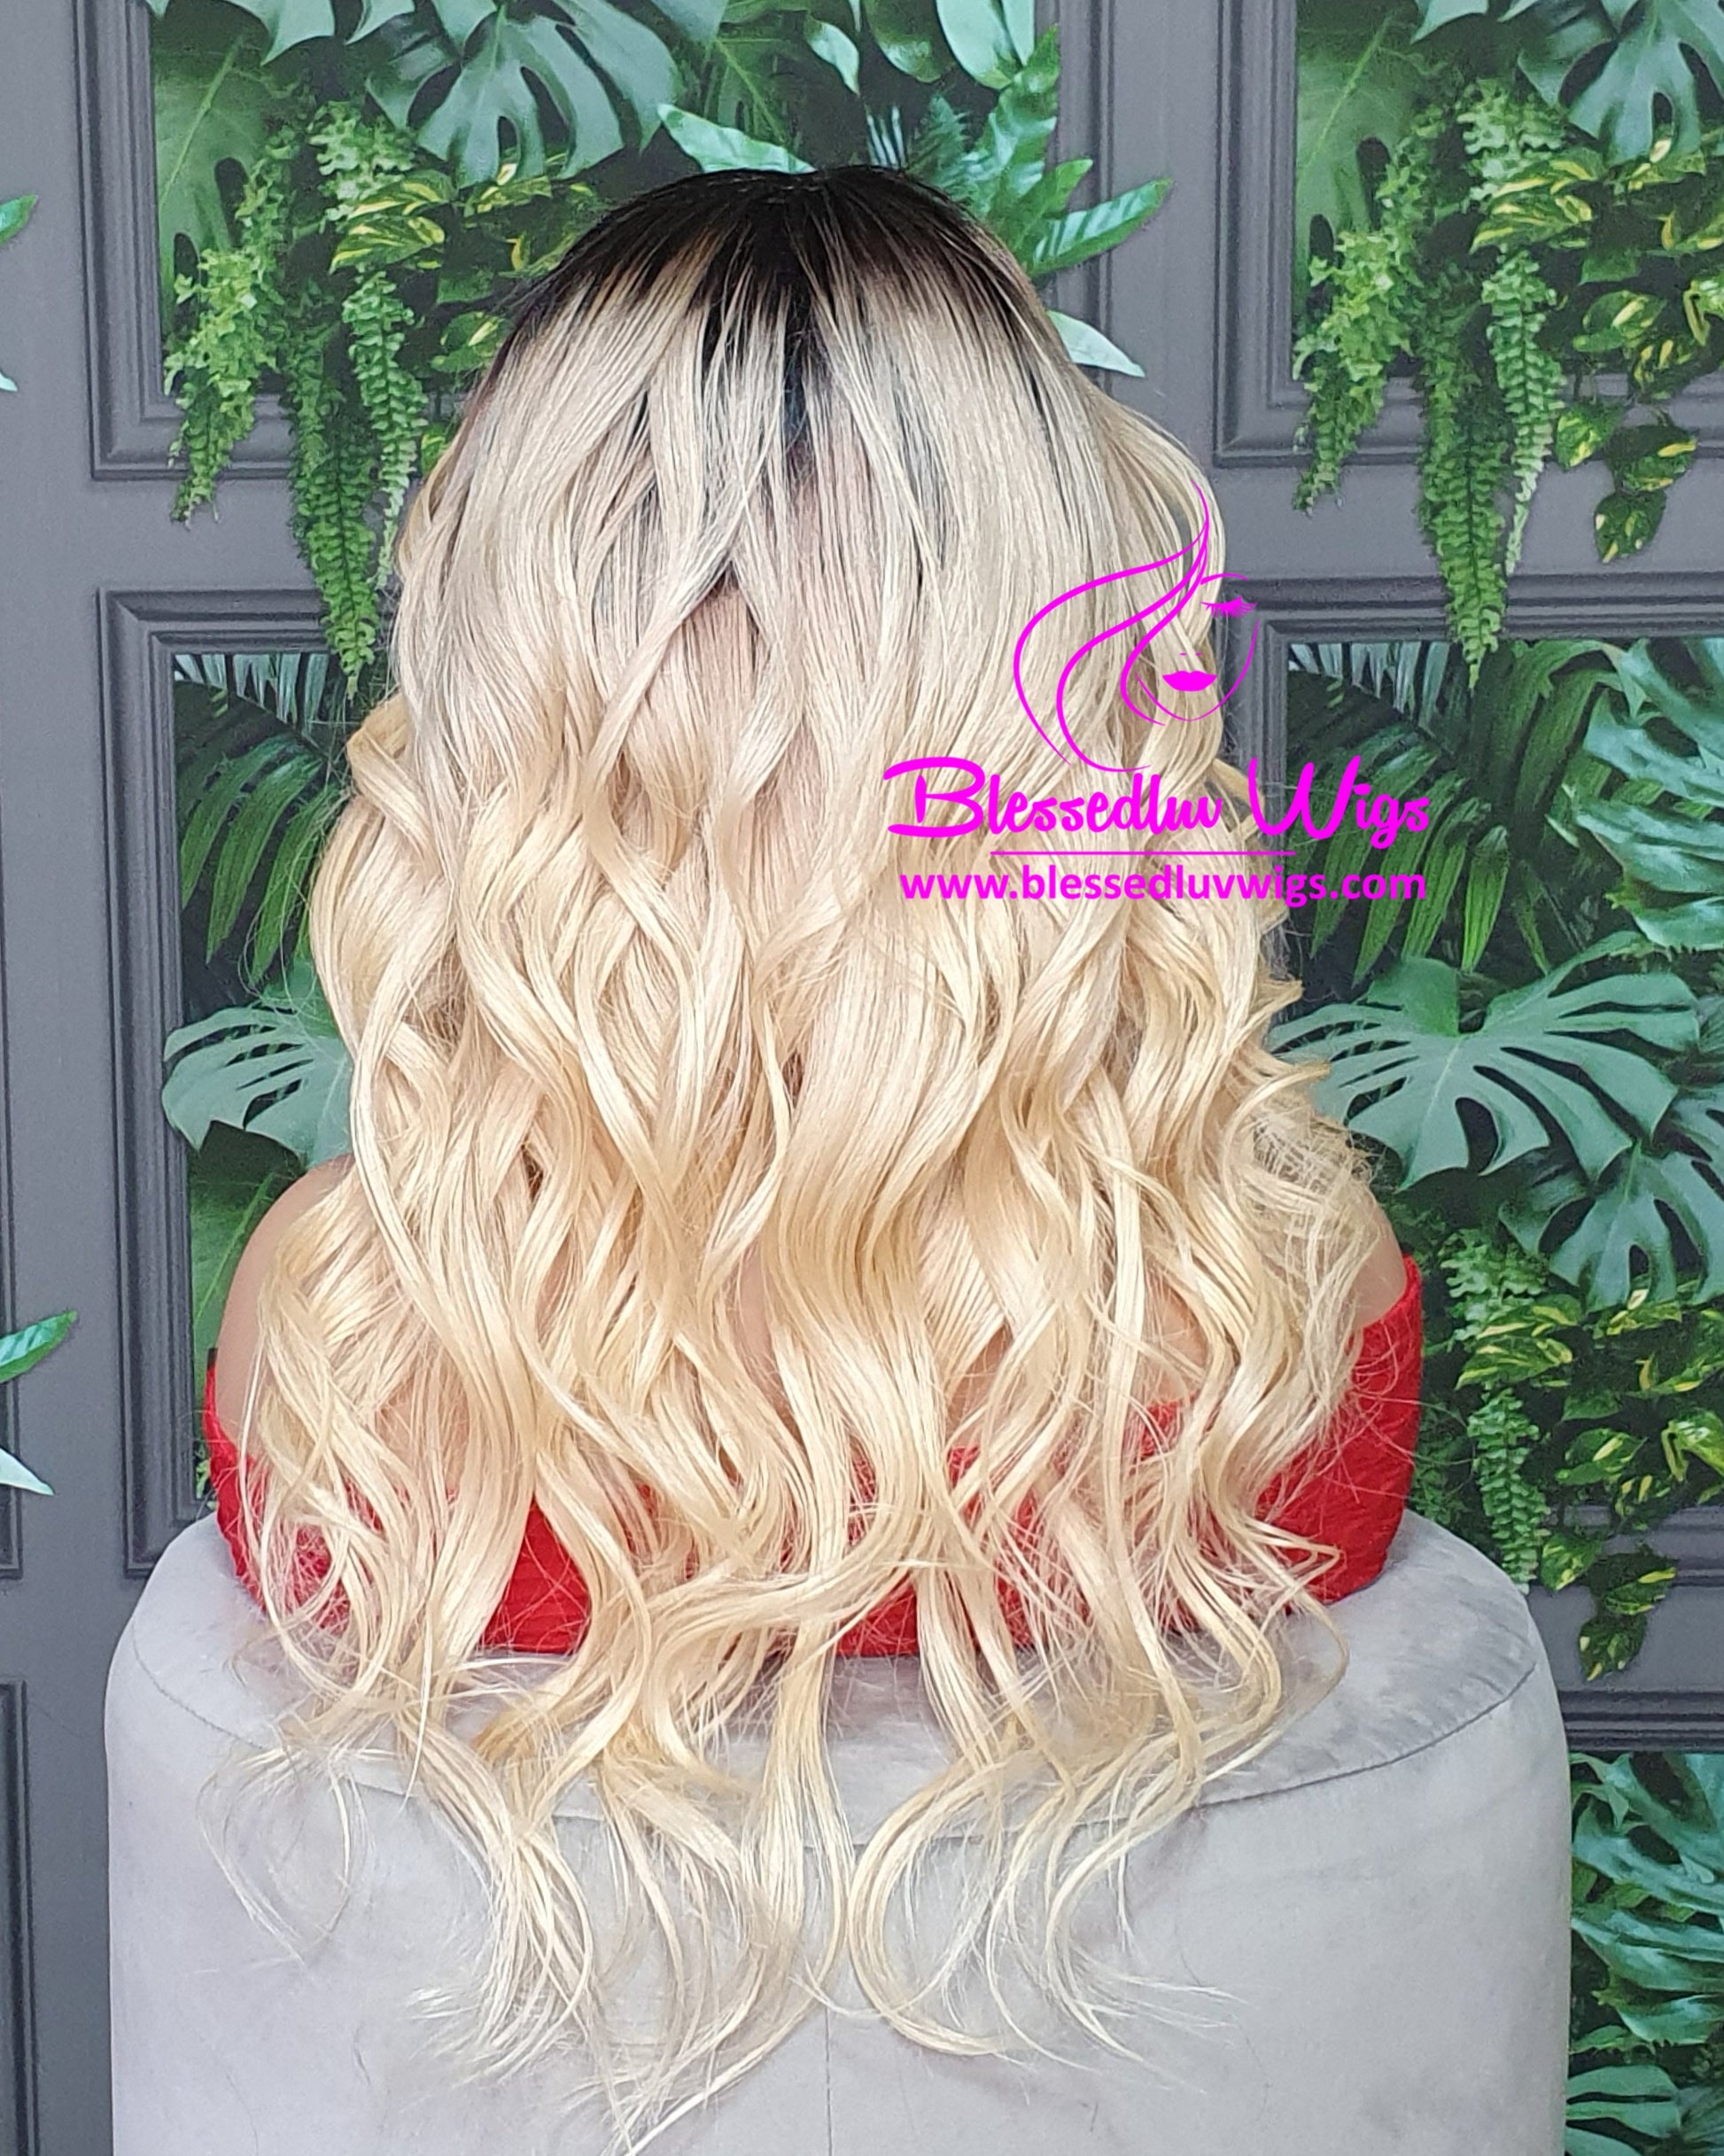 Tara - Ombre Blonde European Hair - Lace Wig-Wig-www.blessedluv.com-Brazilianweave.com